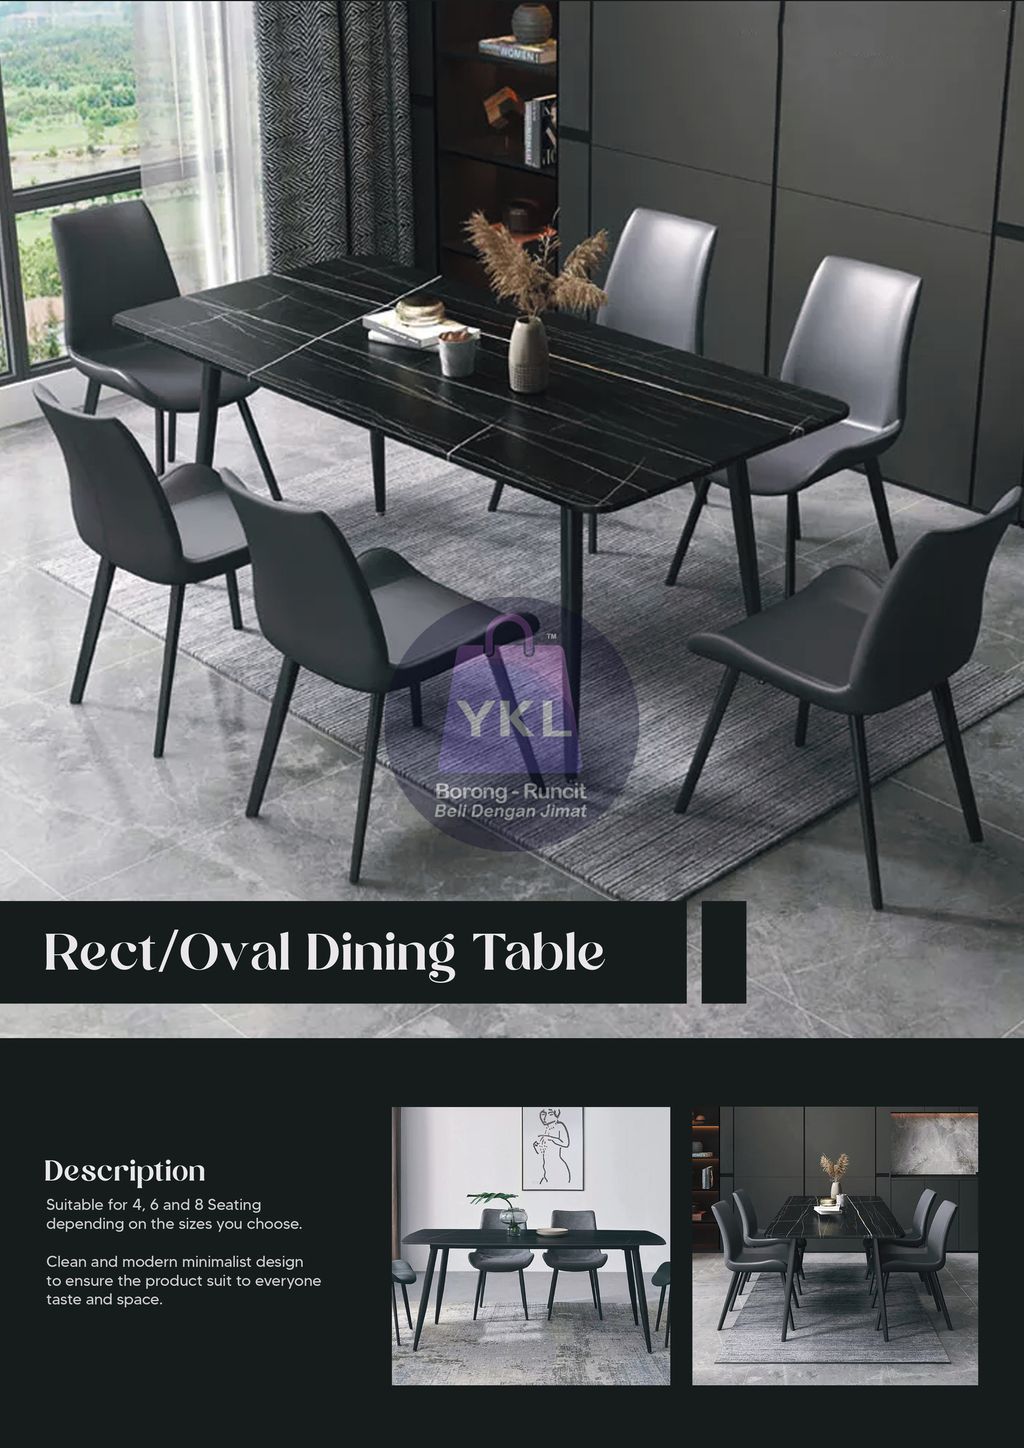 New Dining Table Cat_page-0005 copy